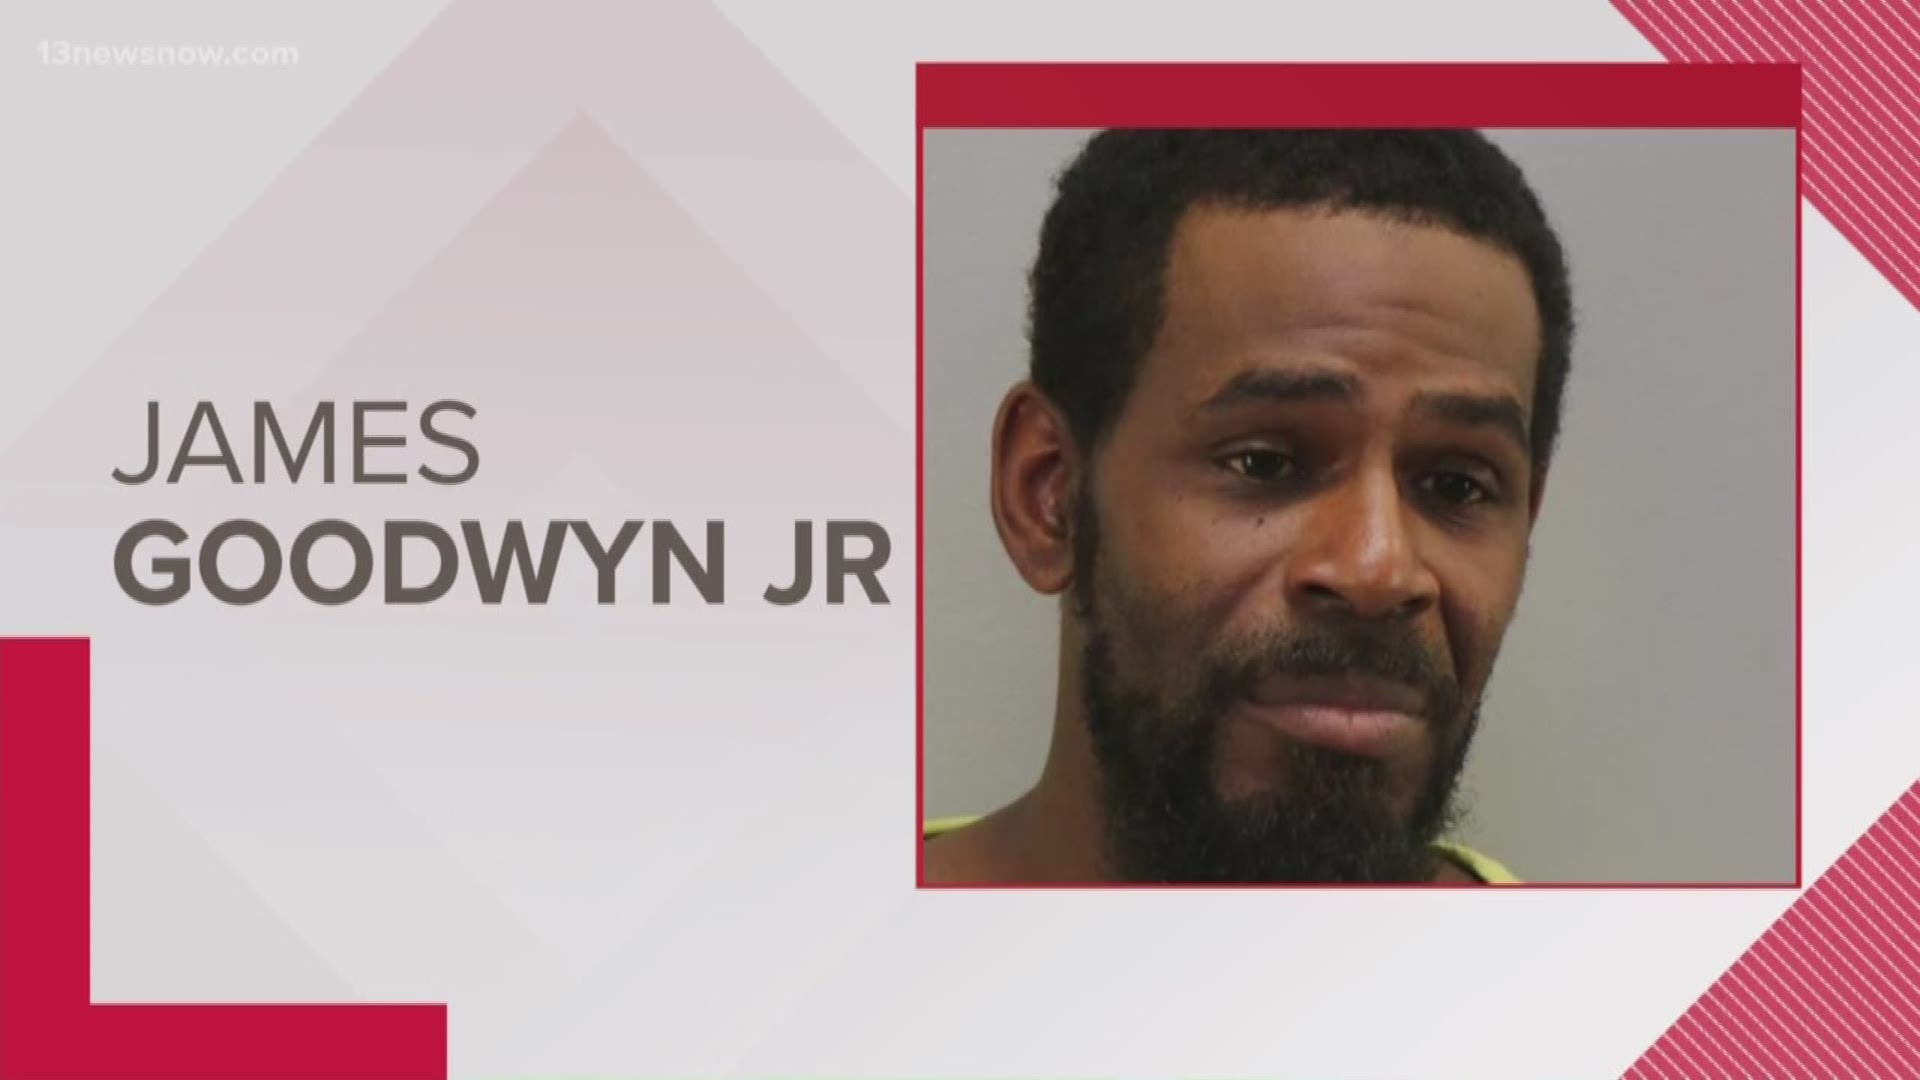 James Goodwyn Jr., 39, was arrested for the murder of Cynthia Carver, a Southampton mom who went missing in February and was found murdered in March.